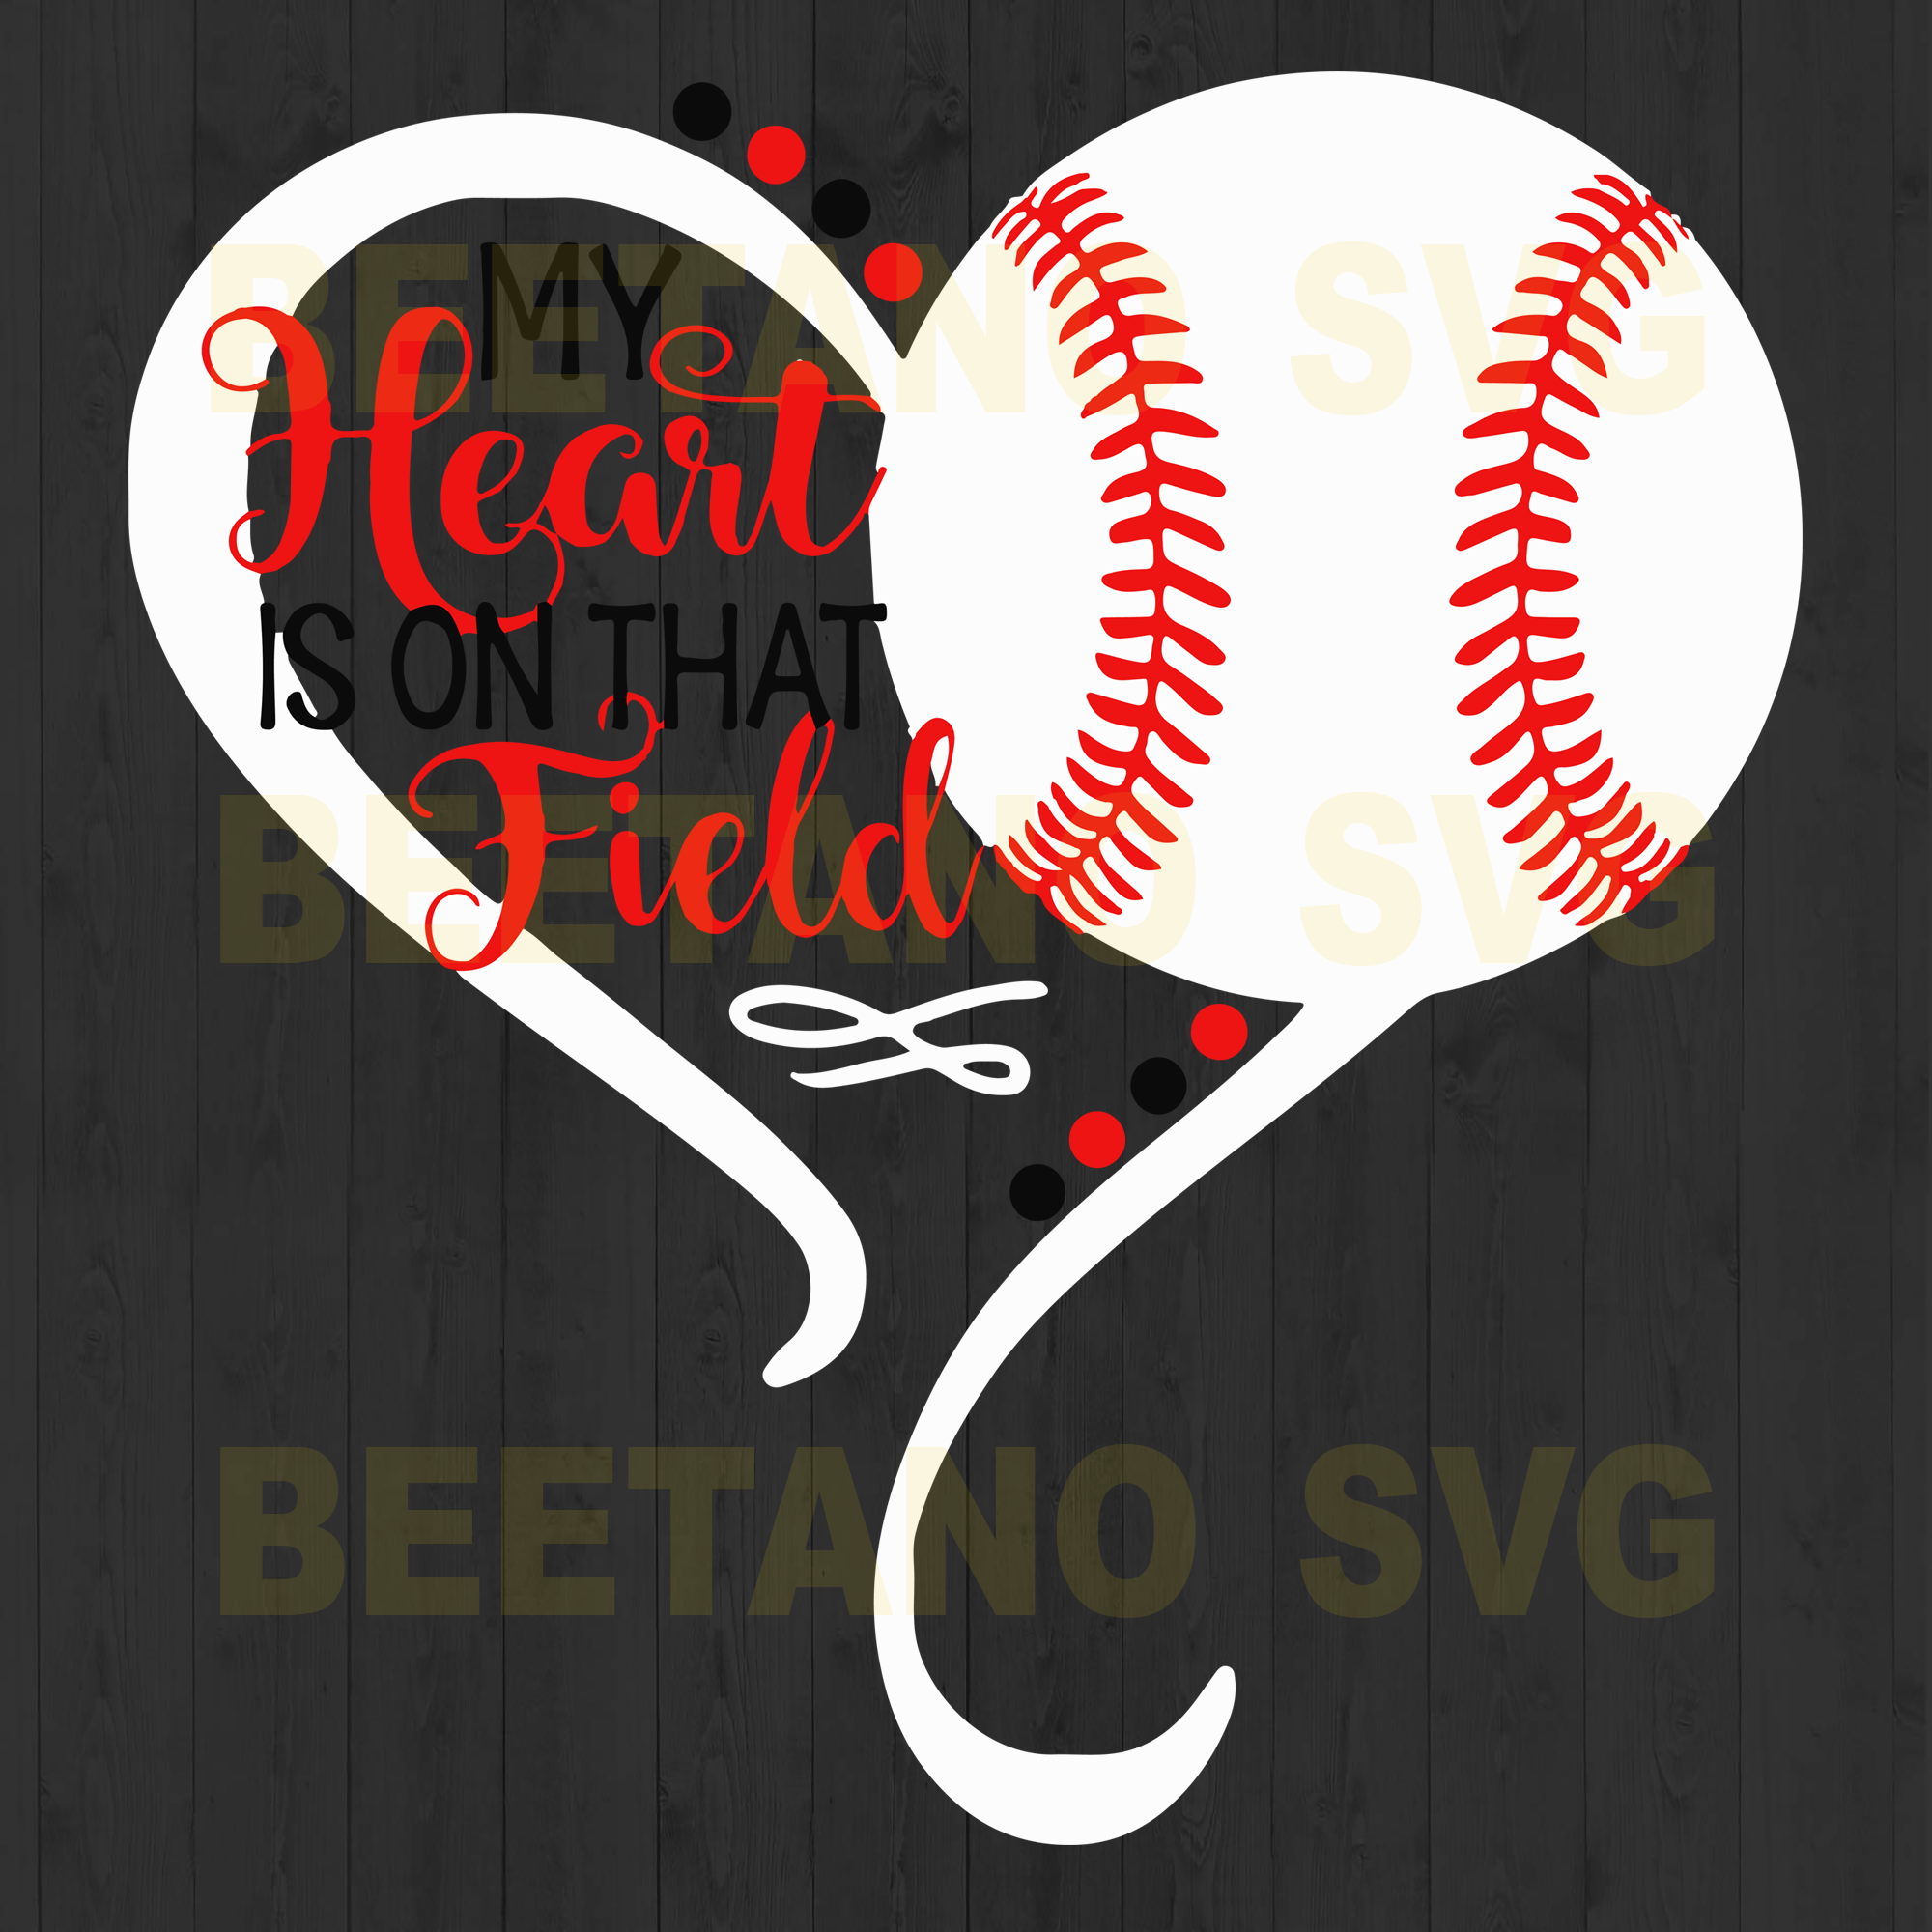 Download My Heart Is On That Field Softball Cutting Files For Cricut Svg Dxf Beetanosvg Scalable Vector Graphics